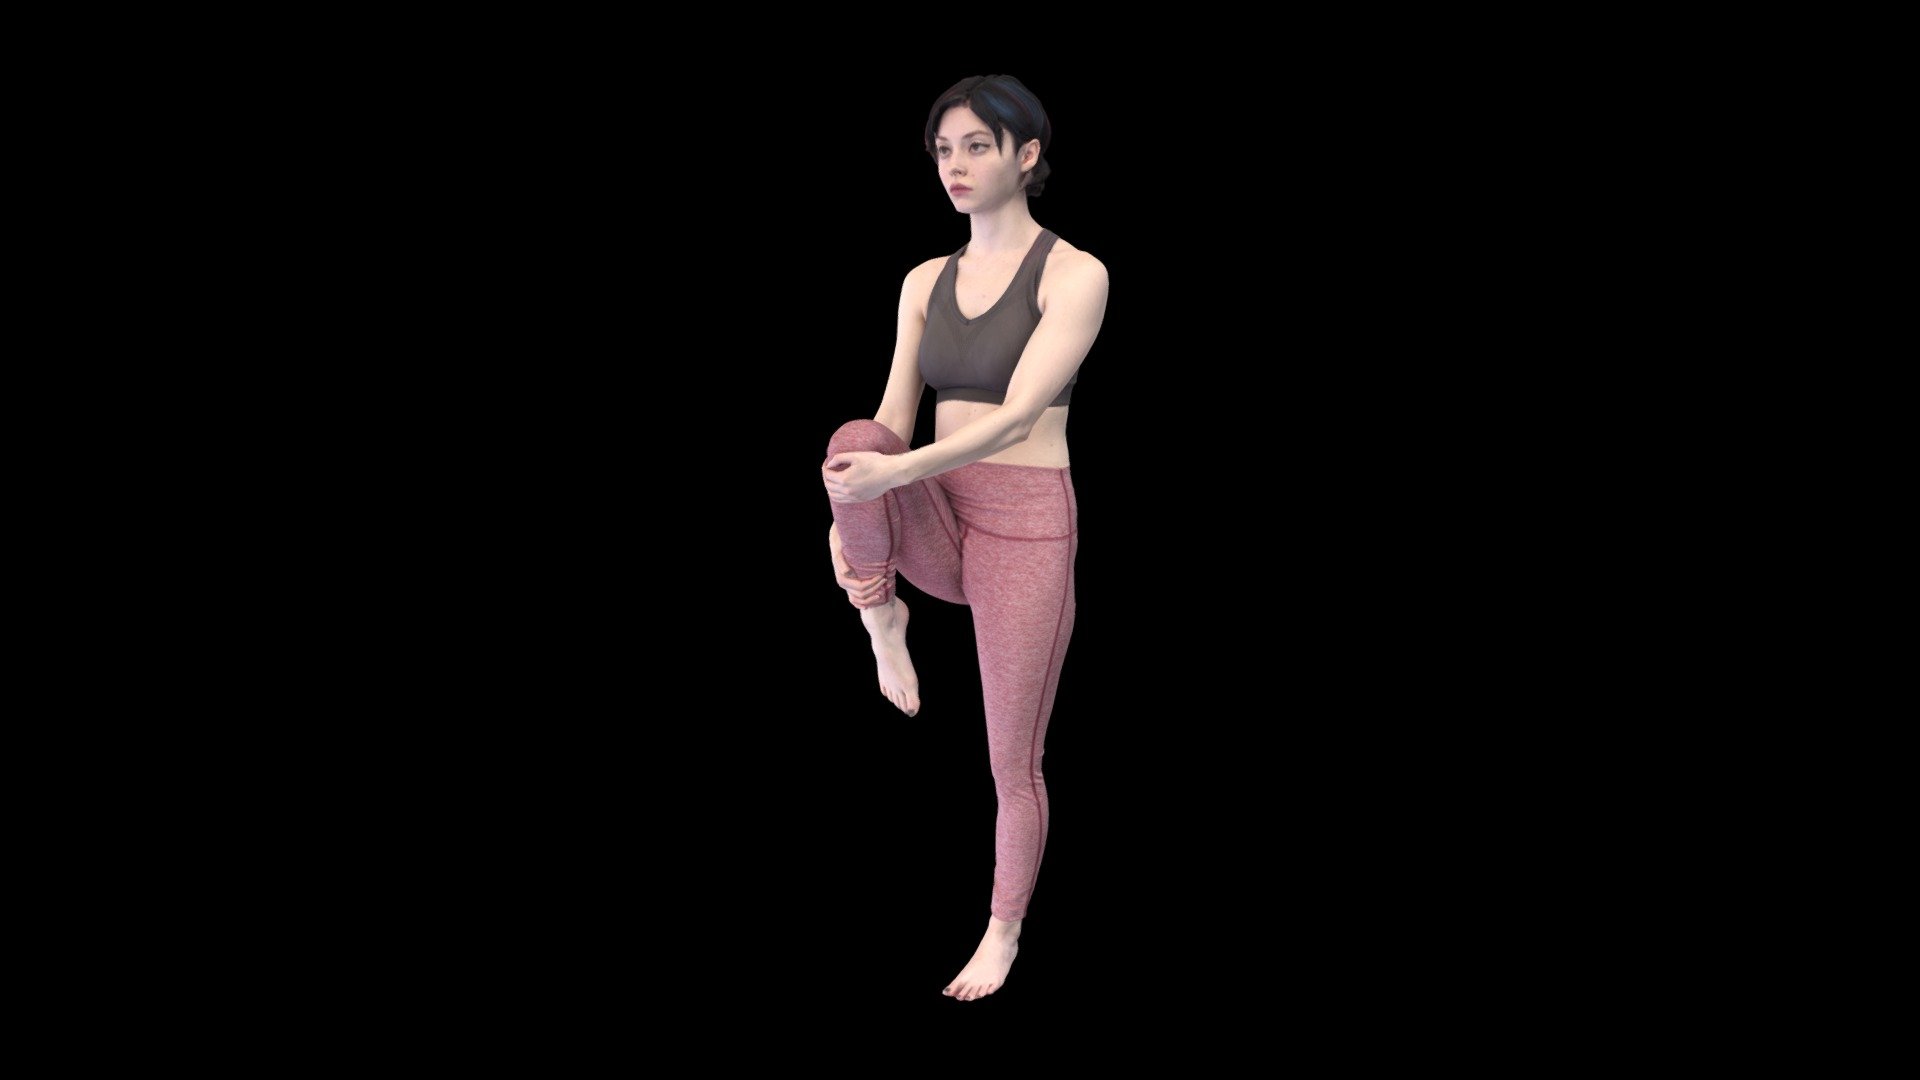 Amy in a knee to chest stretch exercise pose wearing yoga outfit.

Product Features:




Game Engine and PBR ready

High Poly

Textures:

All maps are in PNG format.




Diffuse Map (8192x8192)

Specular Map (8192x8192)

Roughness Map (8192x8192)

Normal Map (8192x8192)

SSS Map (8192x8192)

Model Polycounts:




159860 Faces

79927 Vertices

Available File Formats:




OBJ

FBX

About Human Engine:

Using our 150 DSLR Photogrammetry rig, we create 3D and 4D assets for Games, VFX, Movies, Television, Virtual Reality and Augmented Reality. From 3D scanning to rigging, game-engine integration, we have your character creation needs covered 3d model